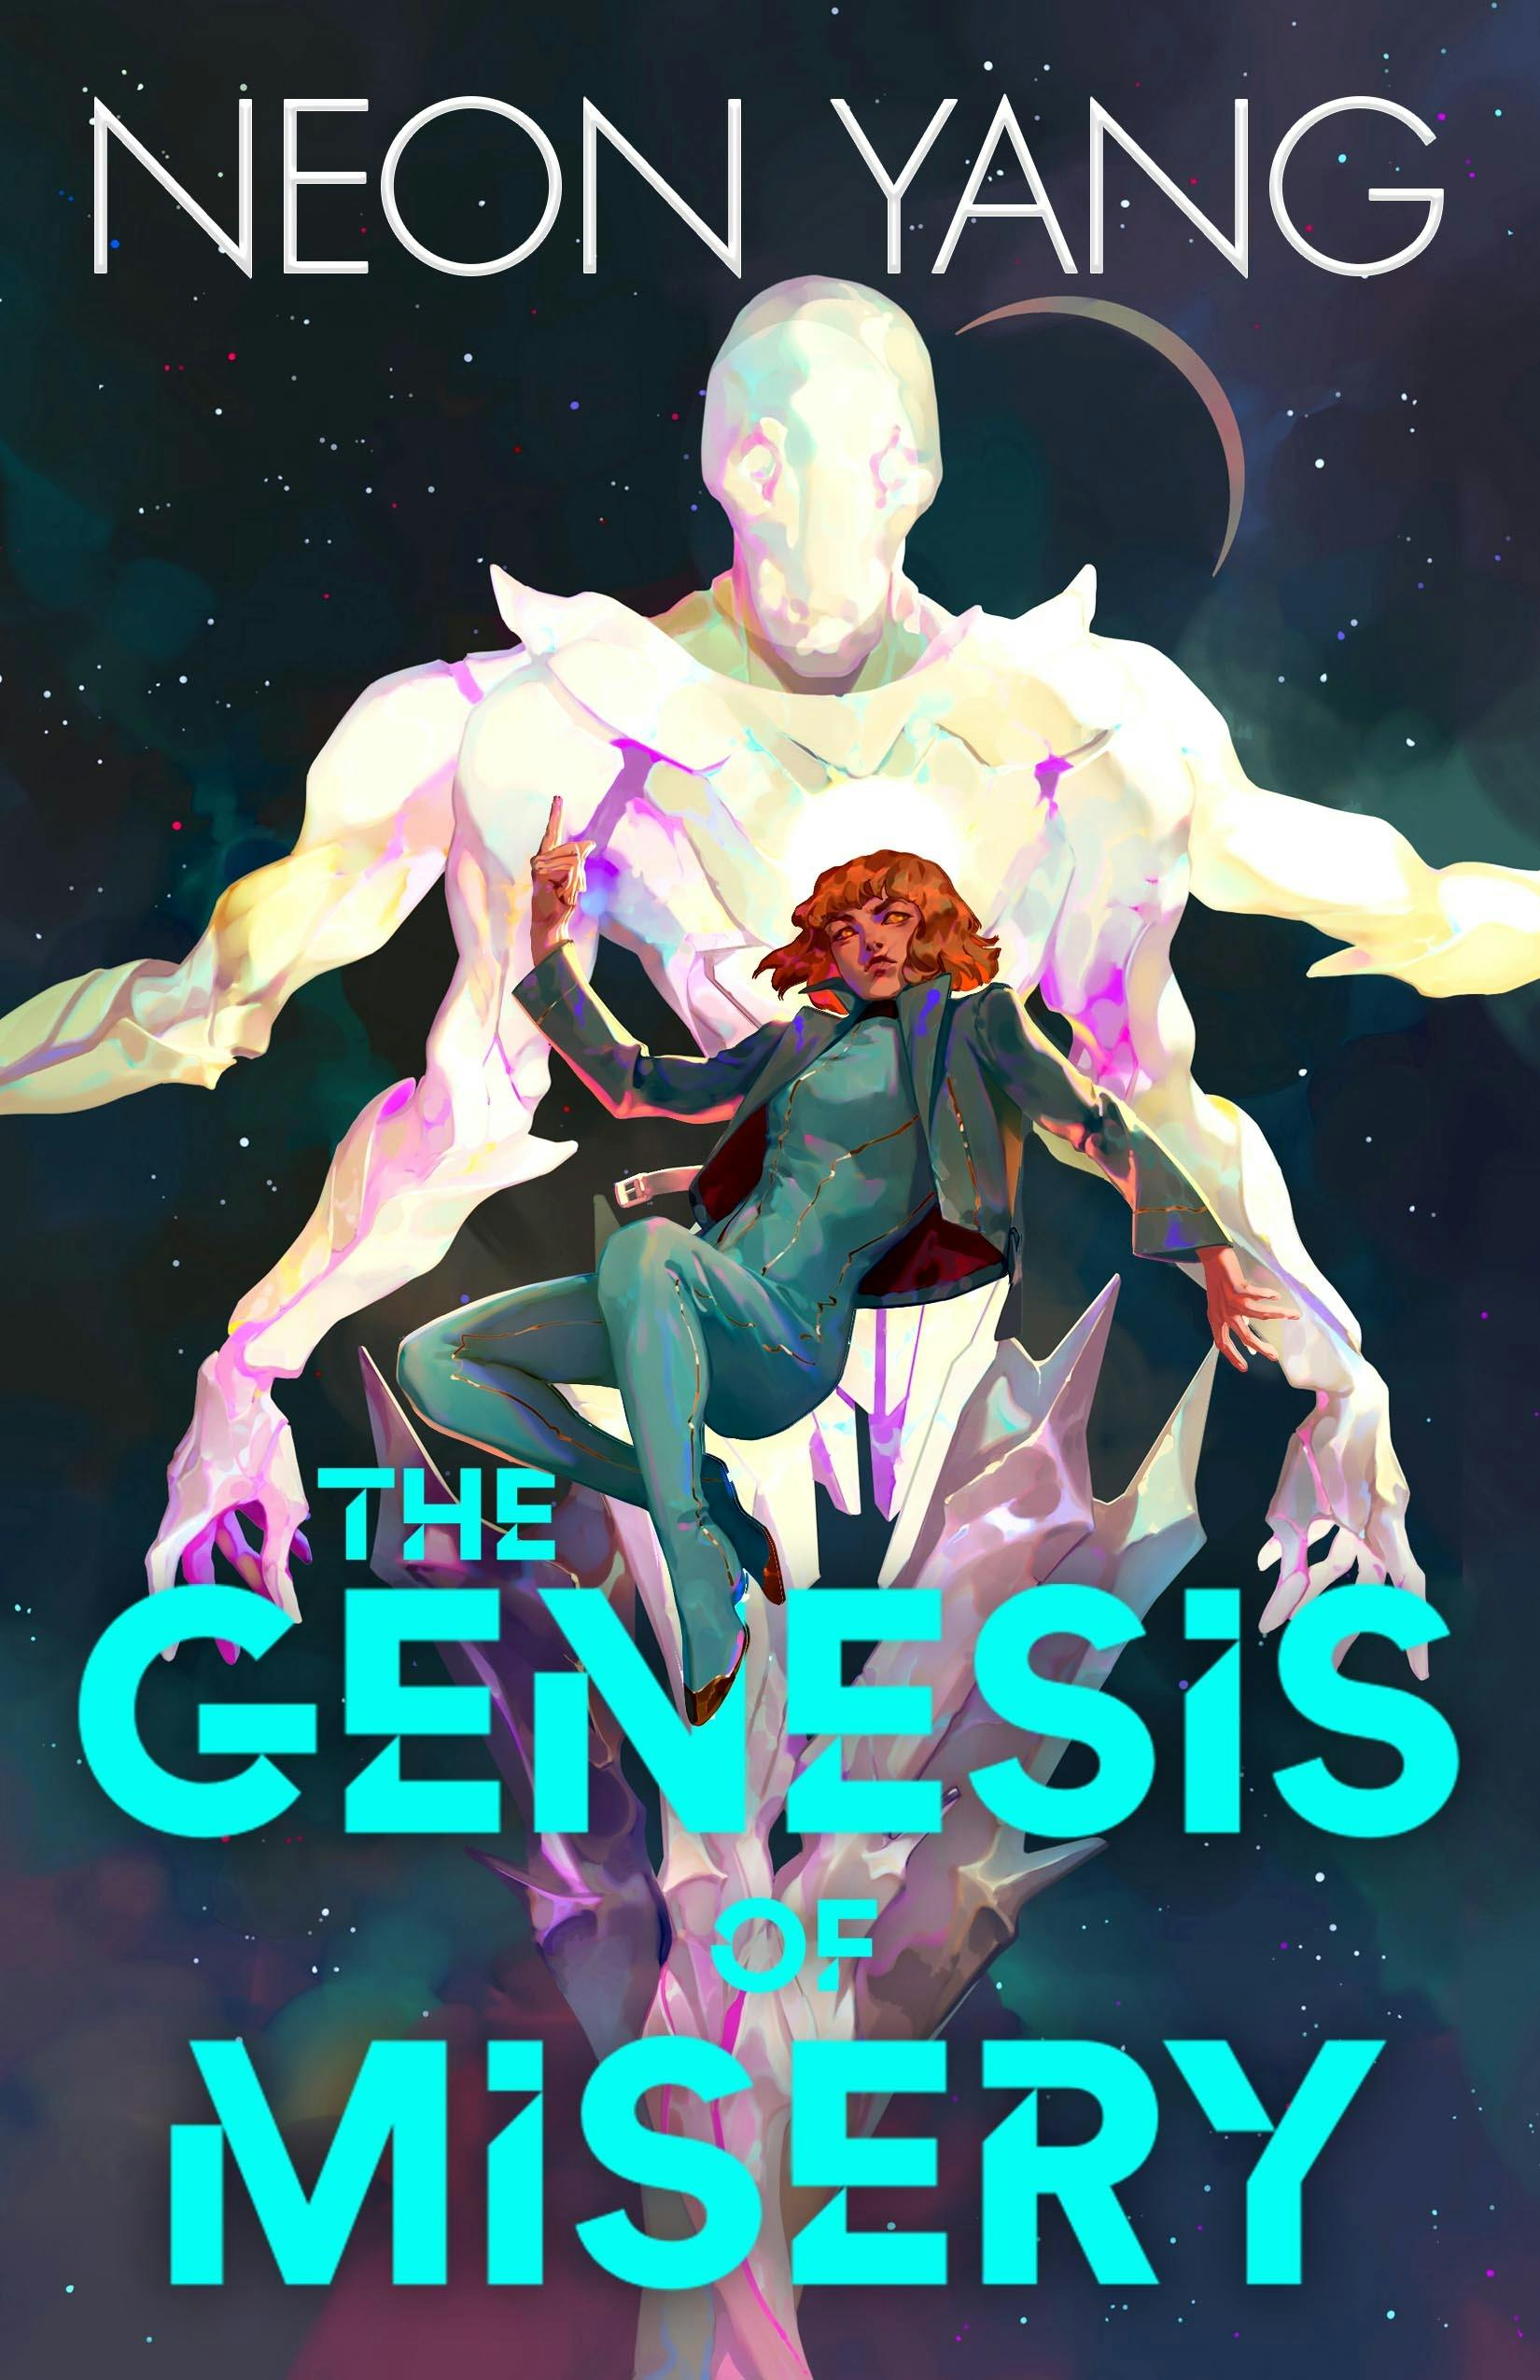 Cover for the book titled as: The Genesis of Misery